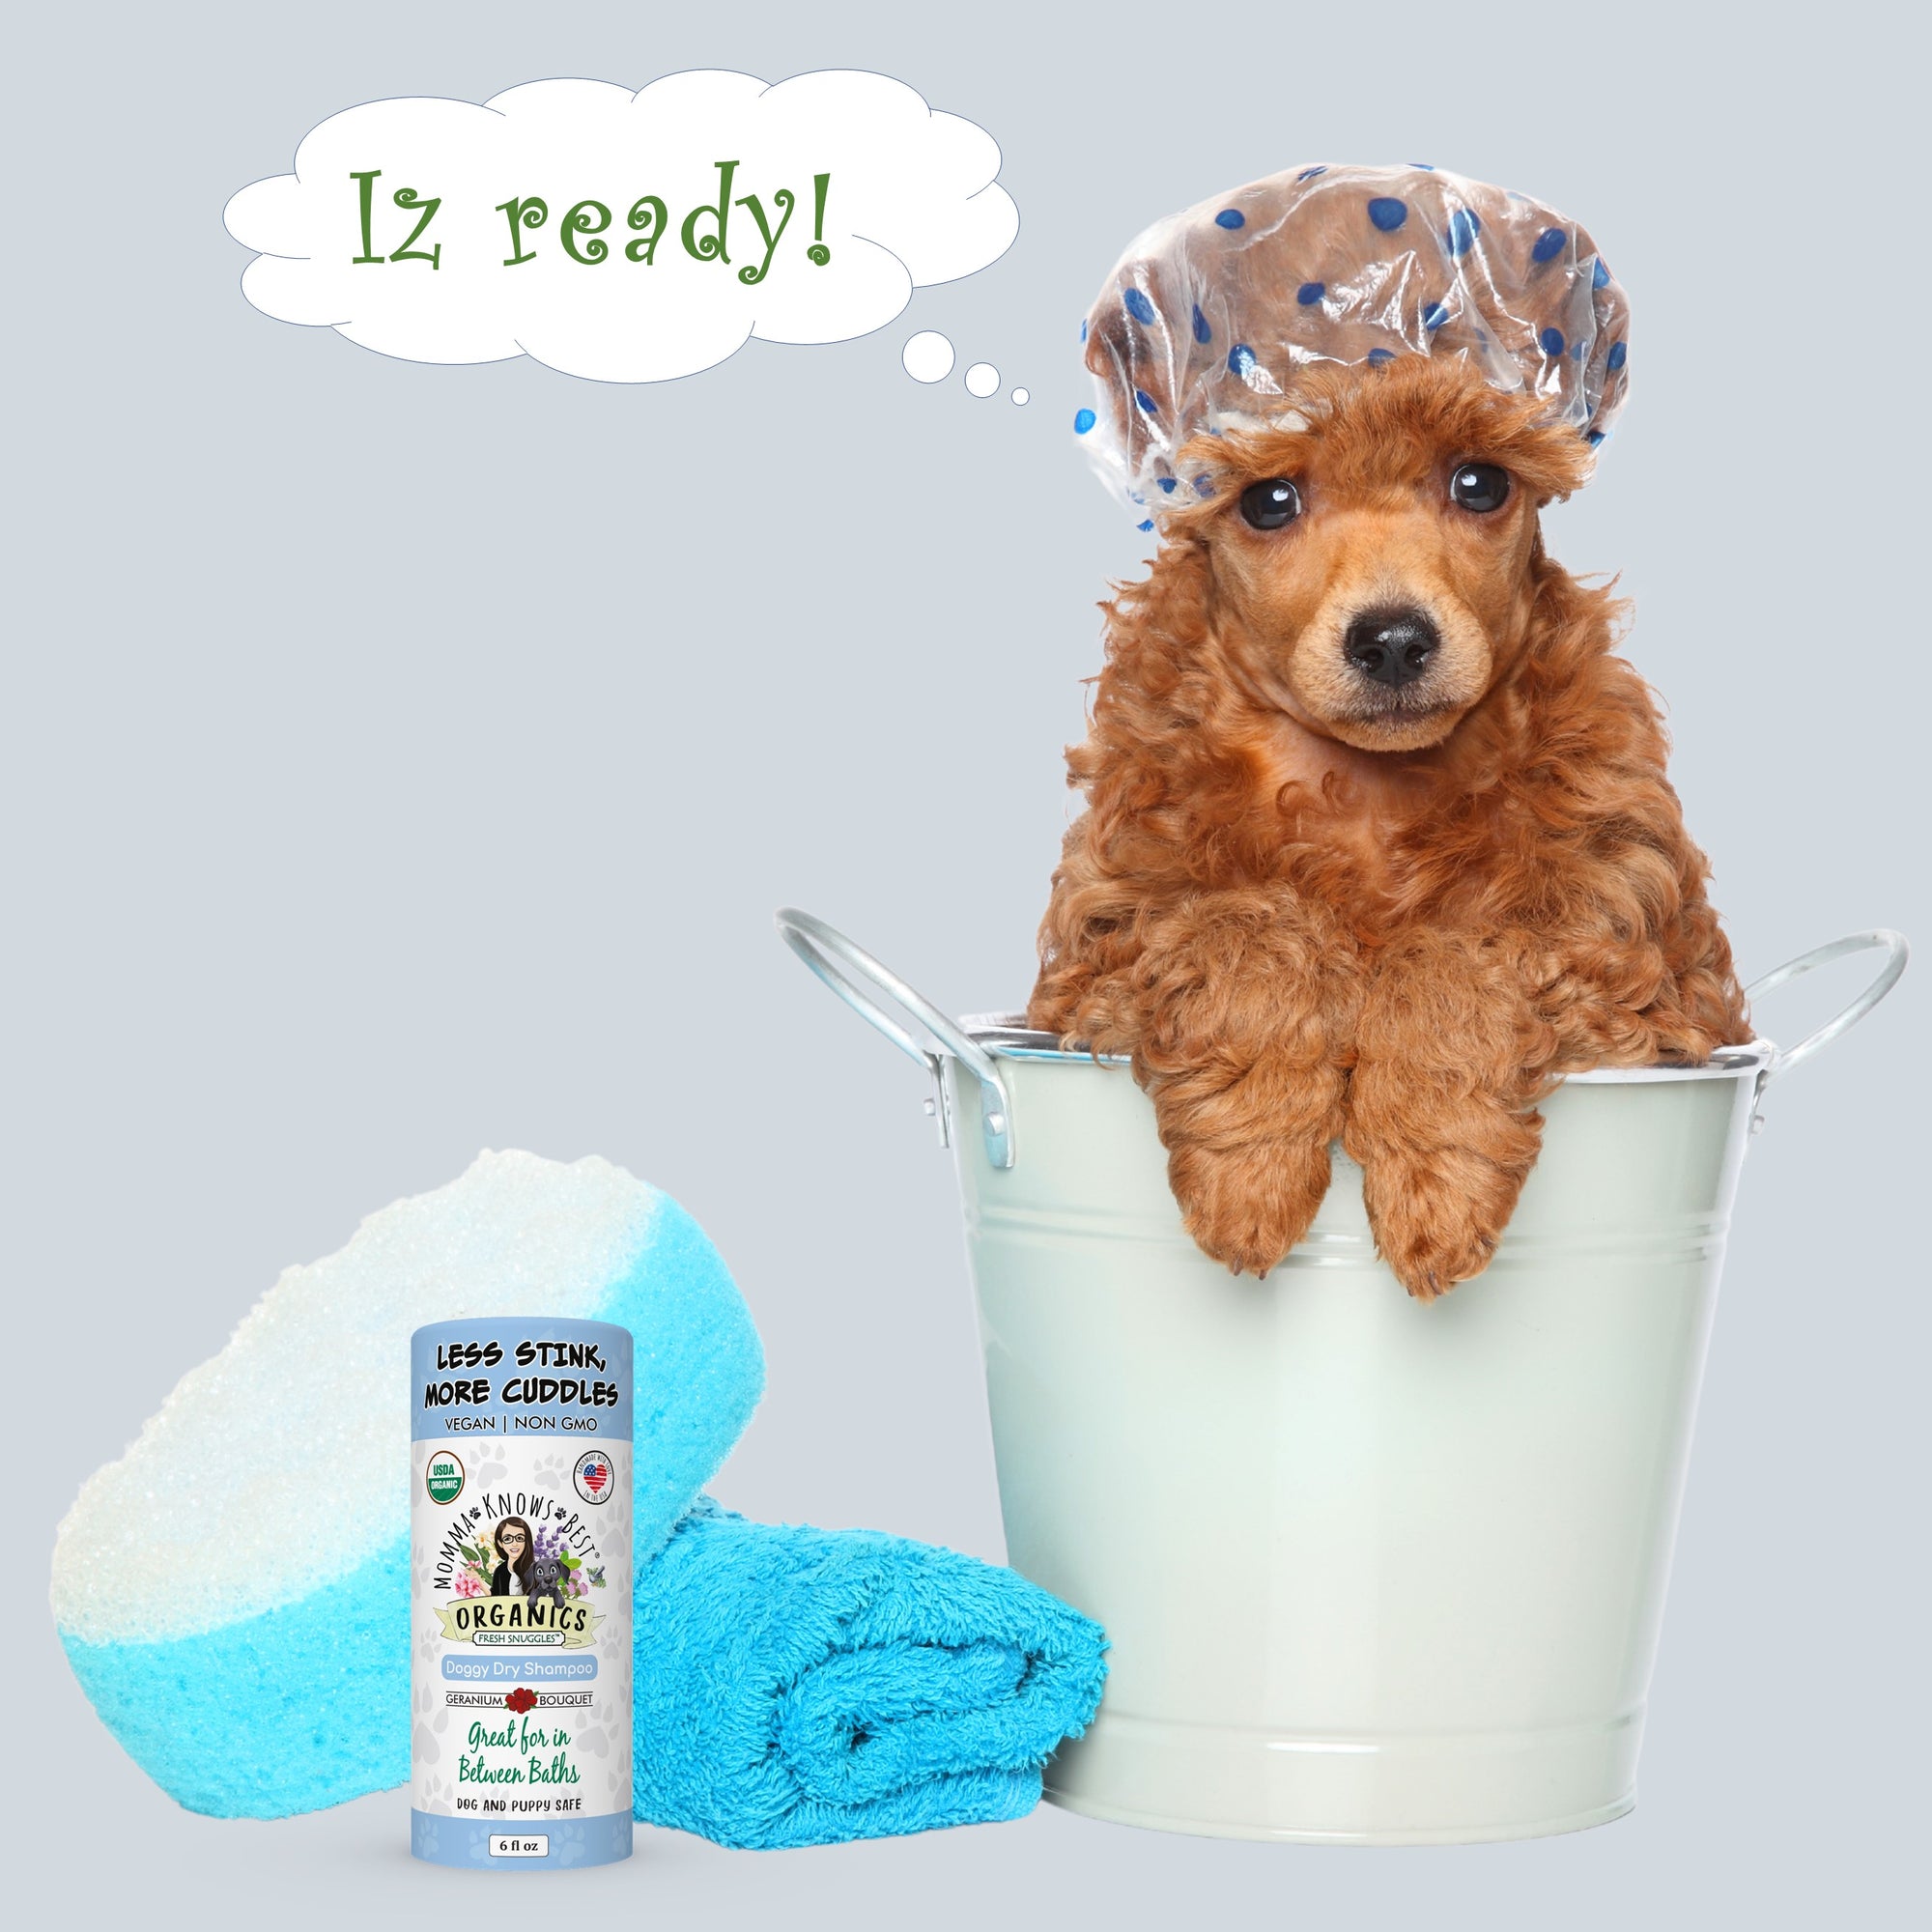 Dog ready for dry dog shampoo by toe beans_2